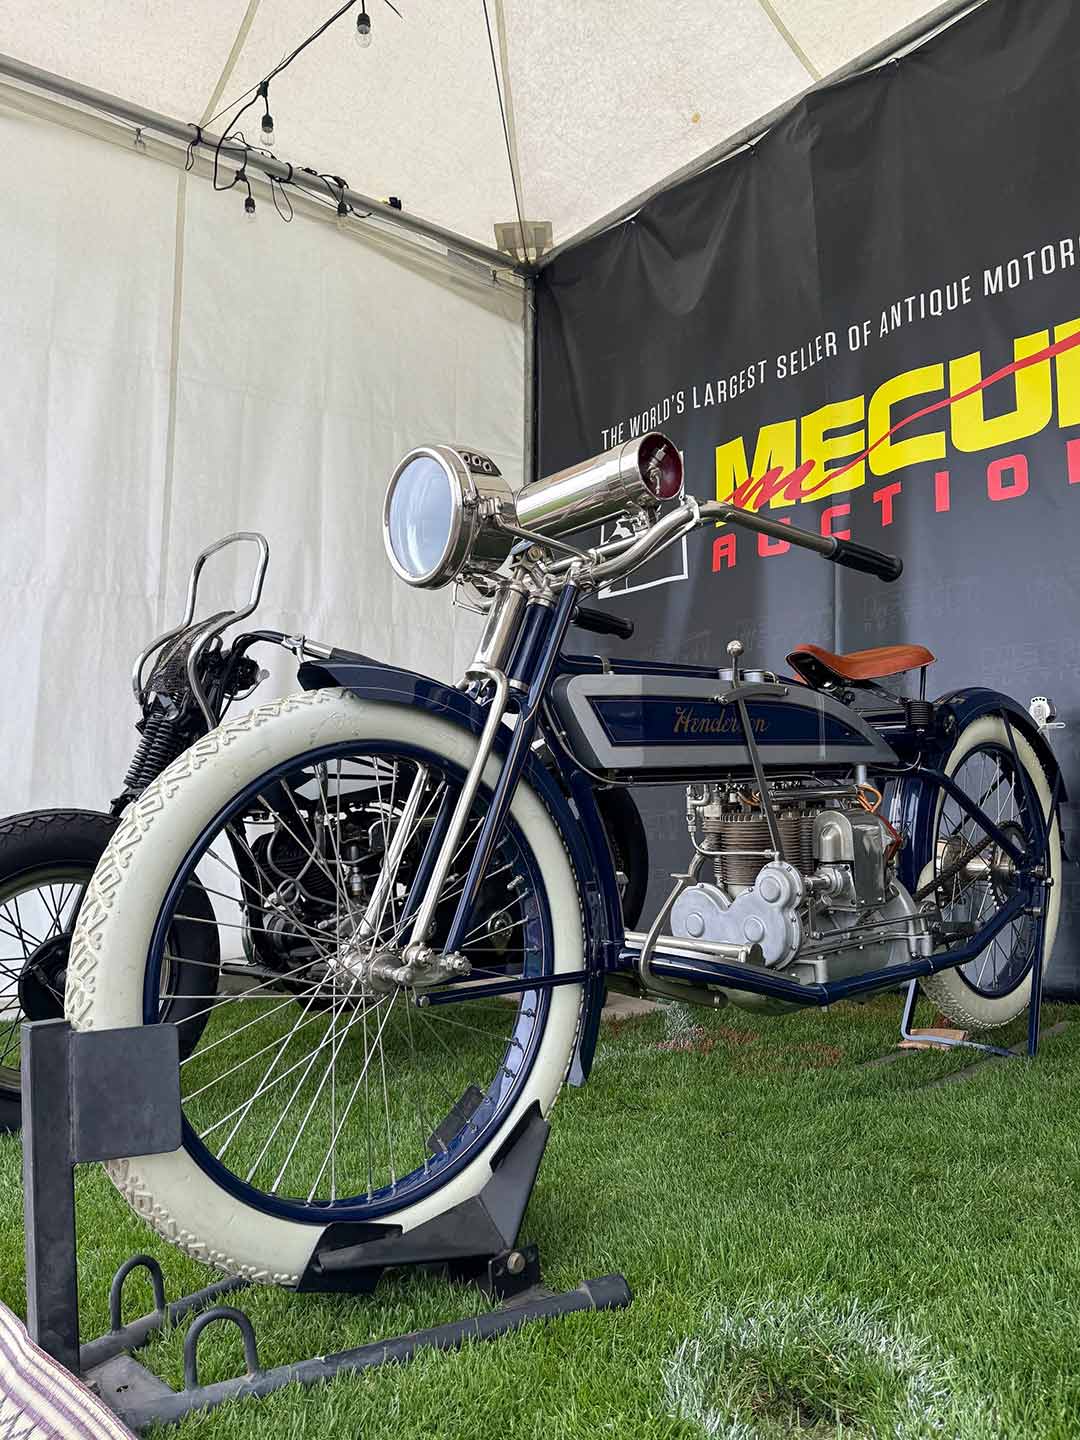 This beautiful Henderson Four-cylinder was rolled in by Mecum Auctions to display at its tent.